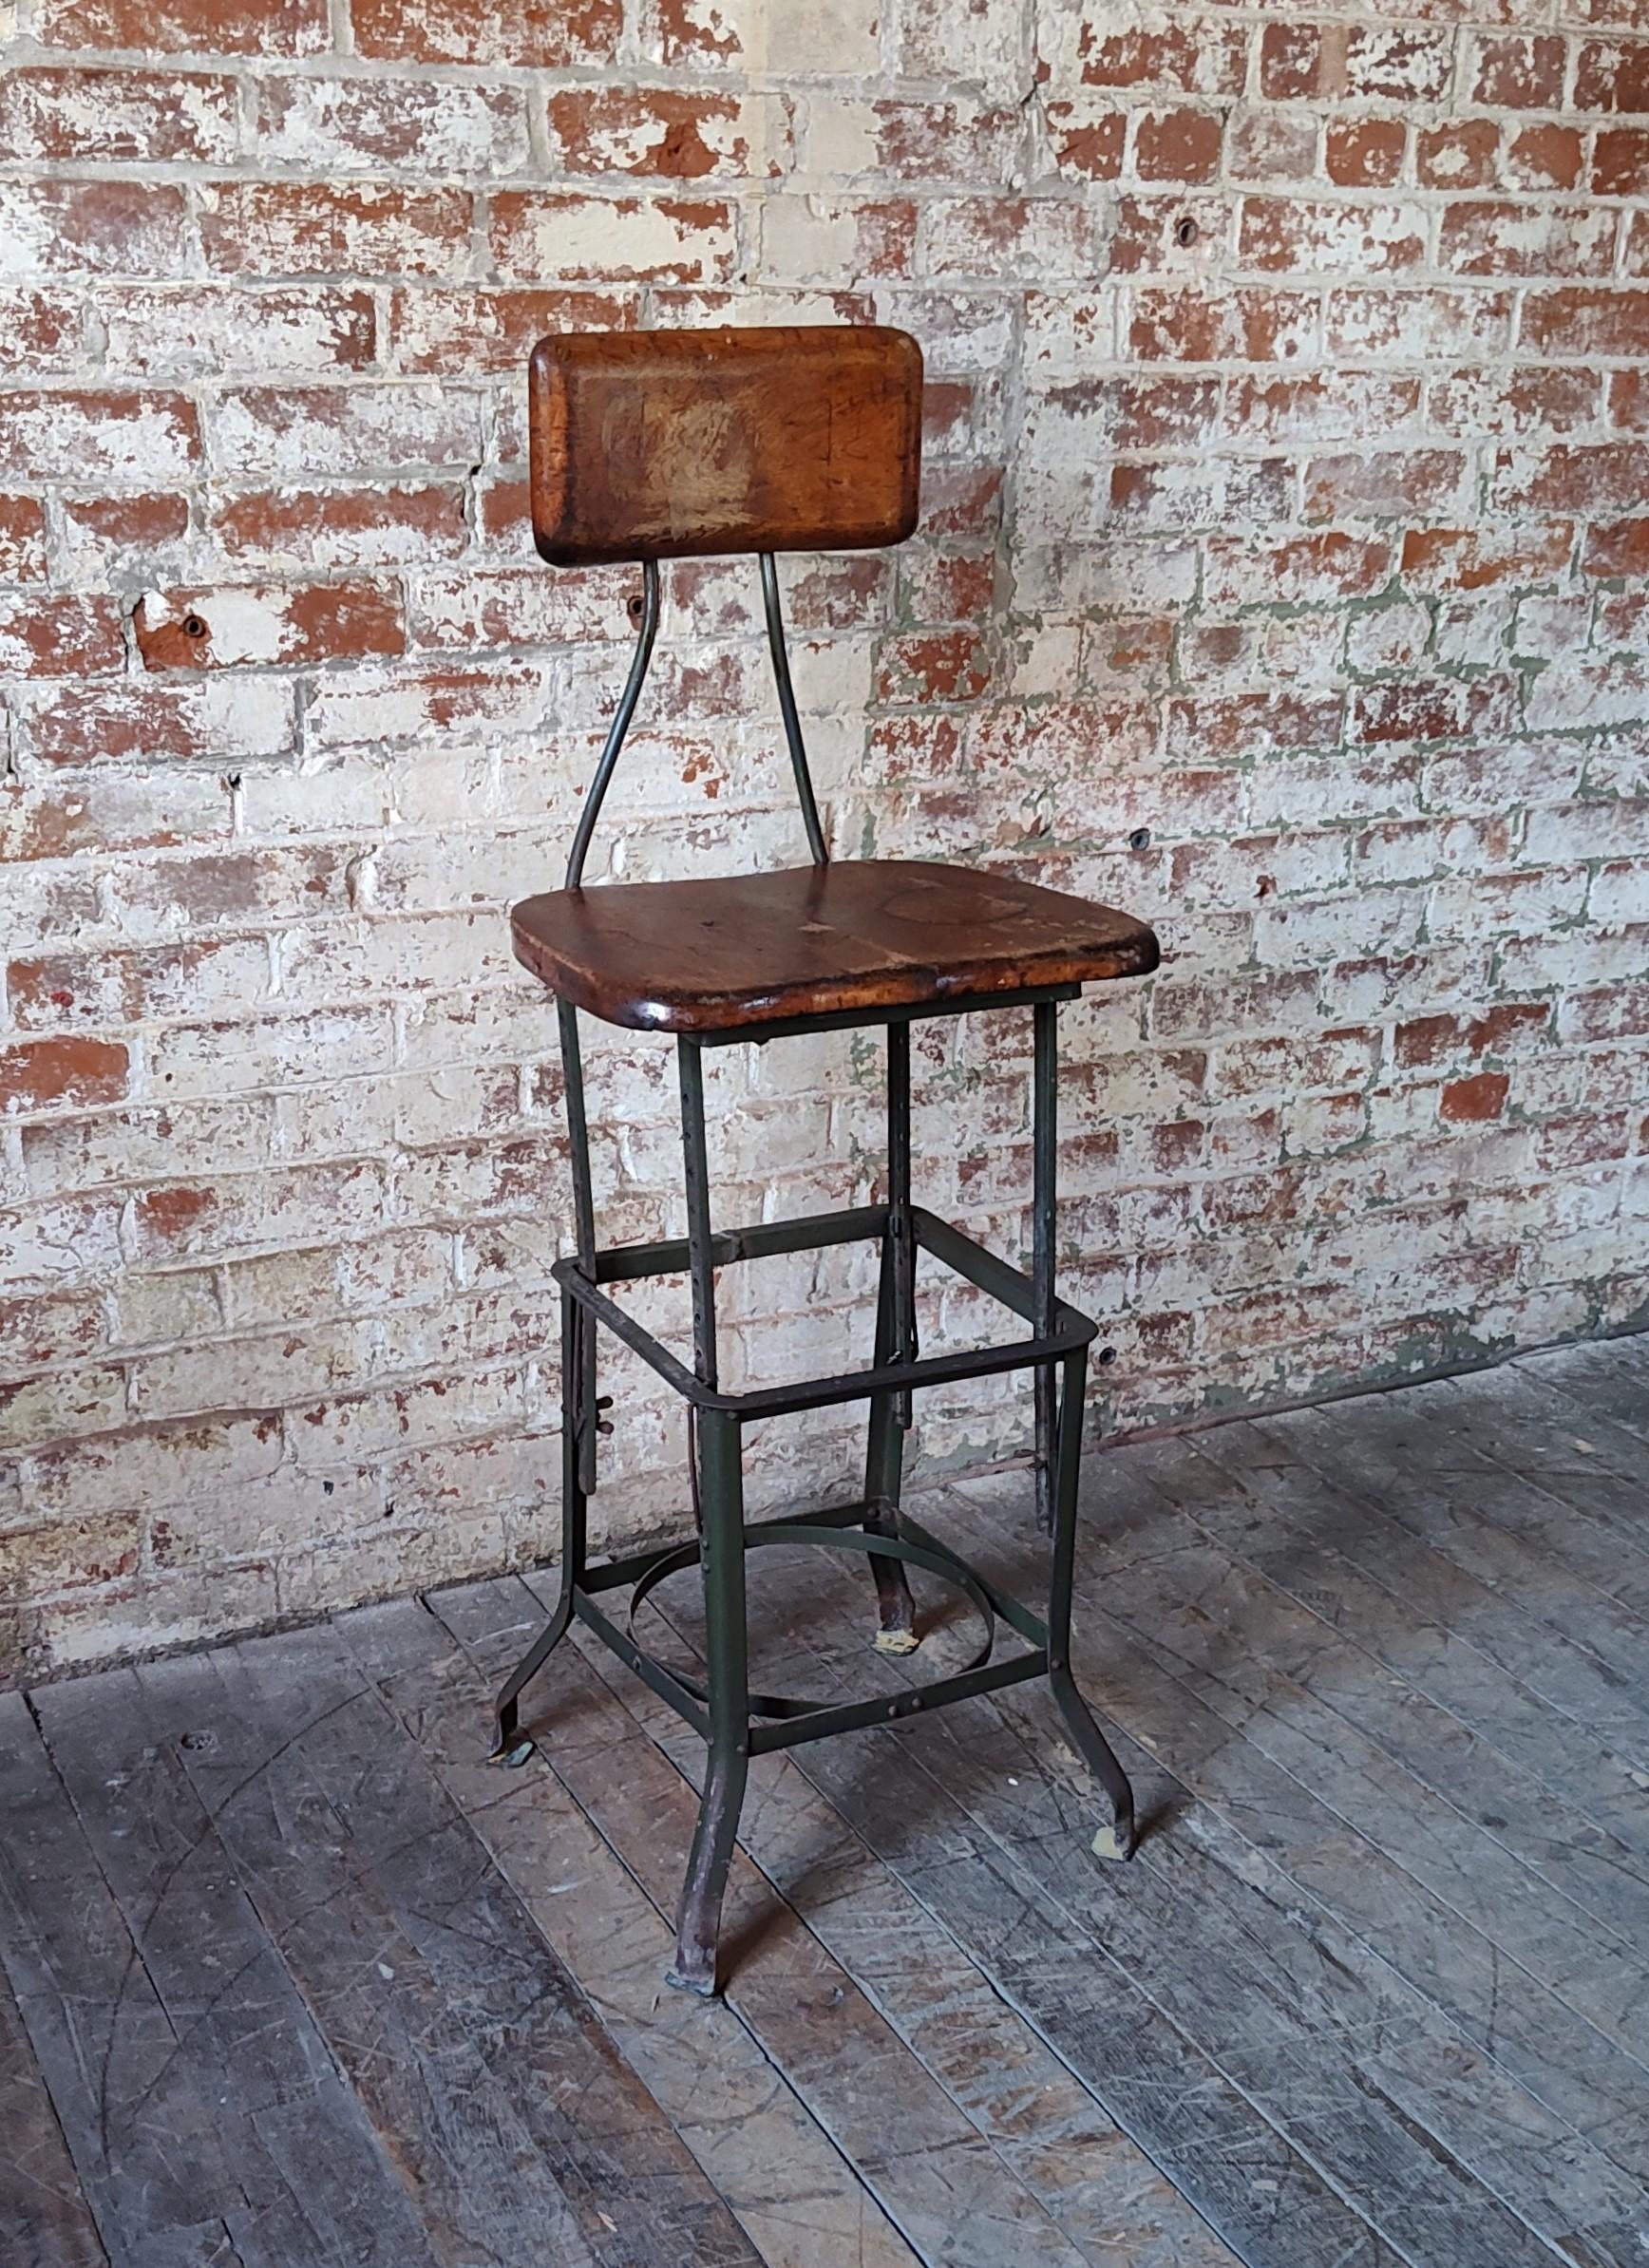 Antique Factory Stool

Overall Dimensions: 15